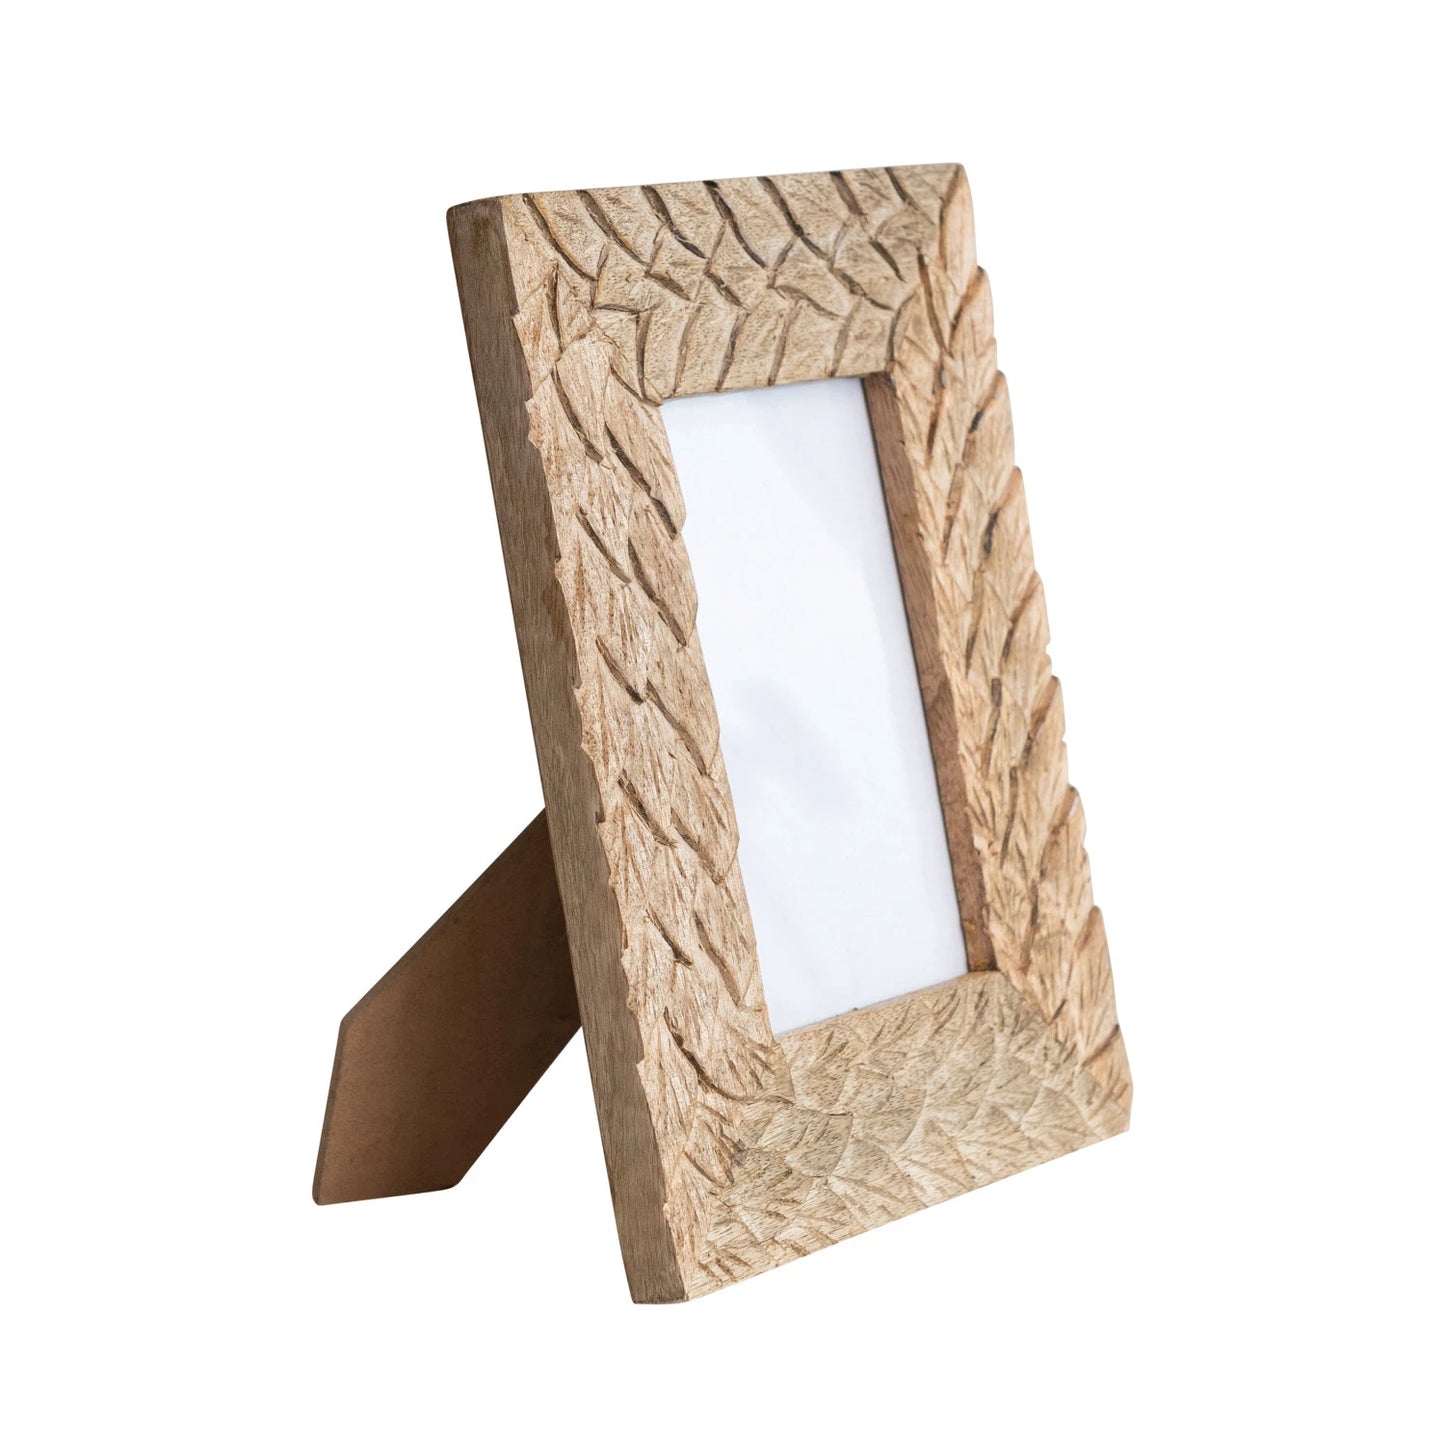 Carved Wood Picture Frame